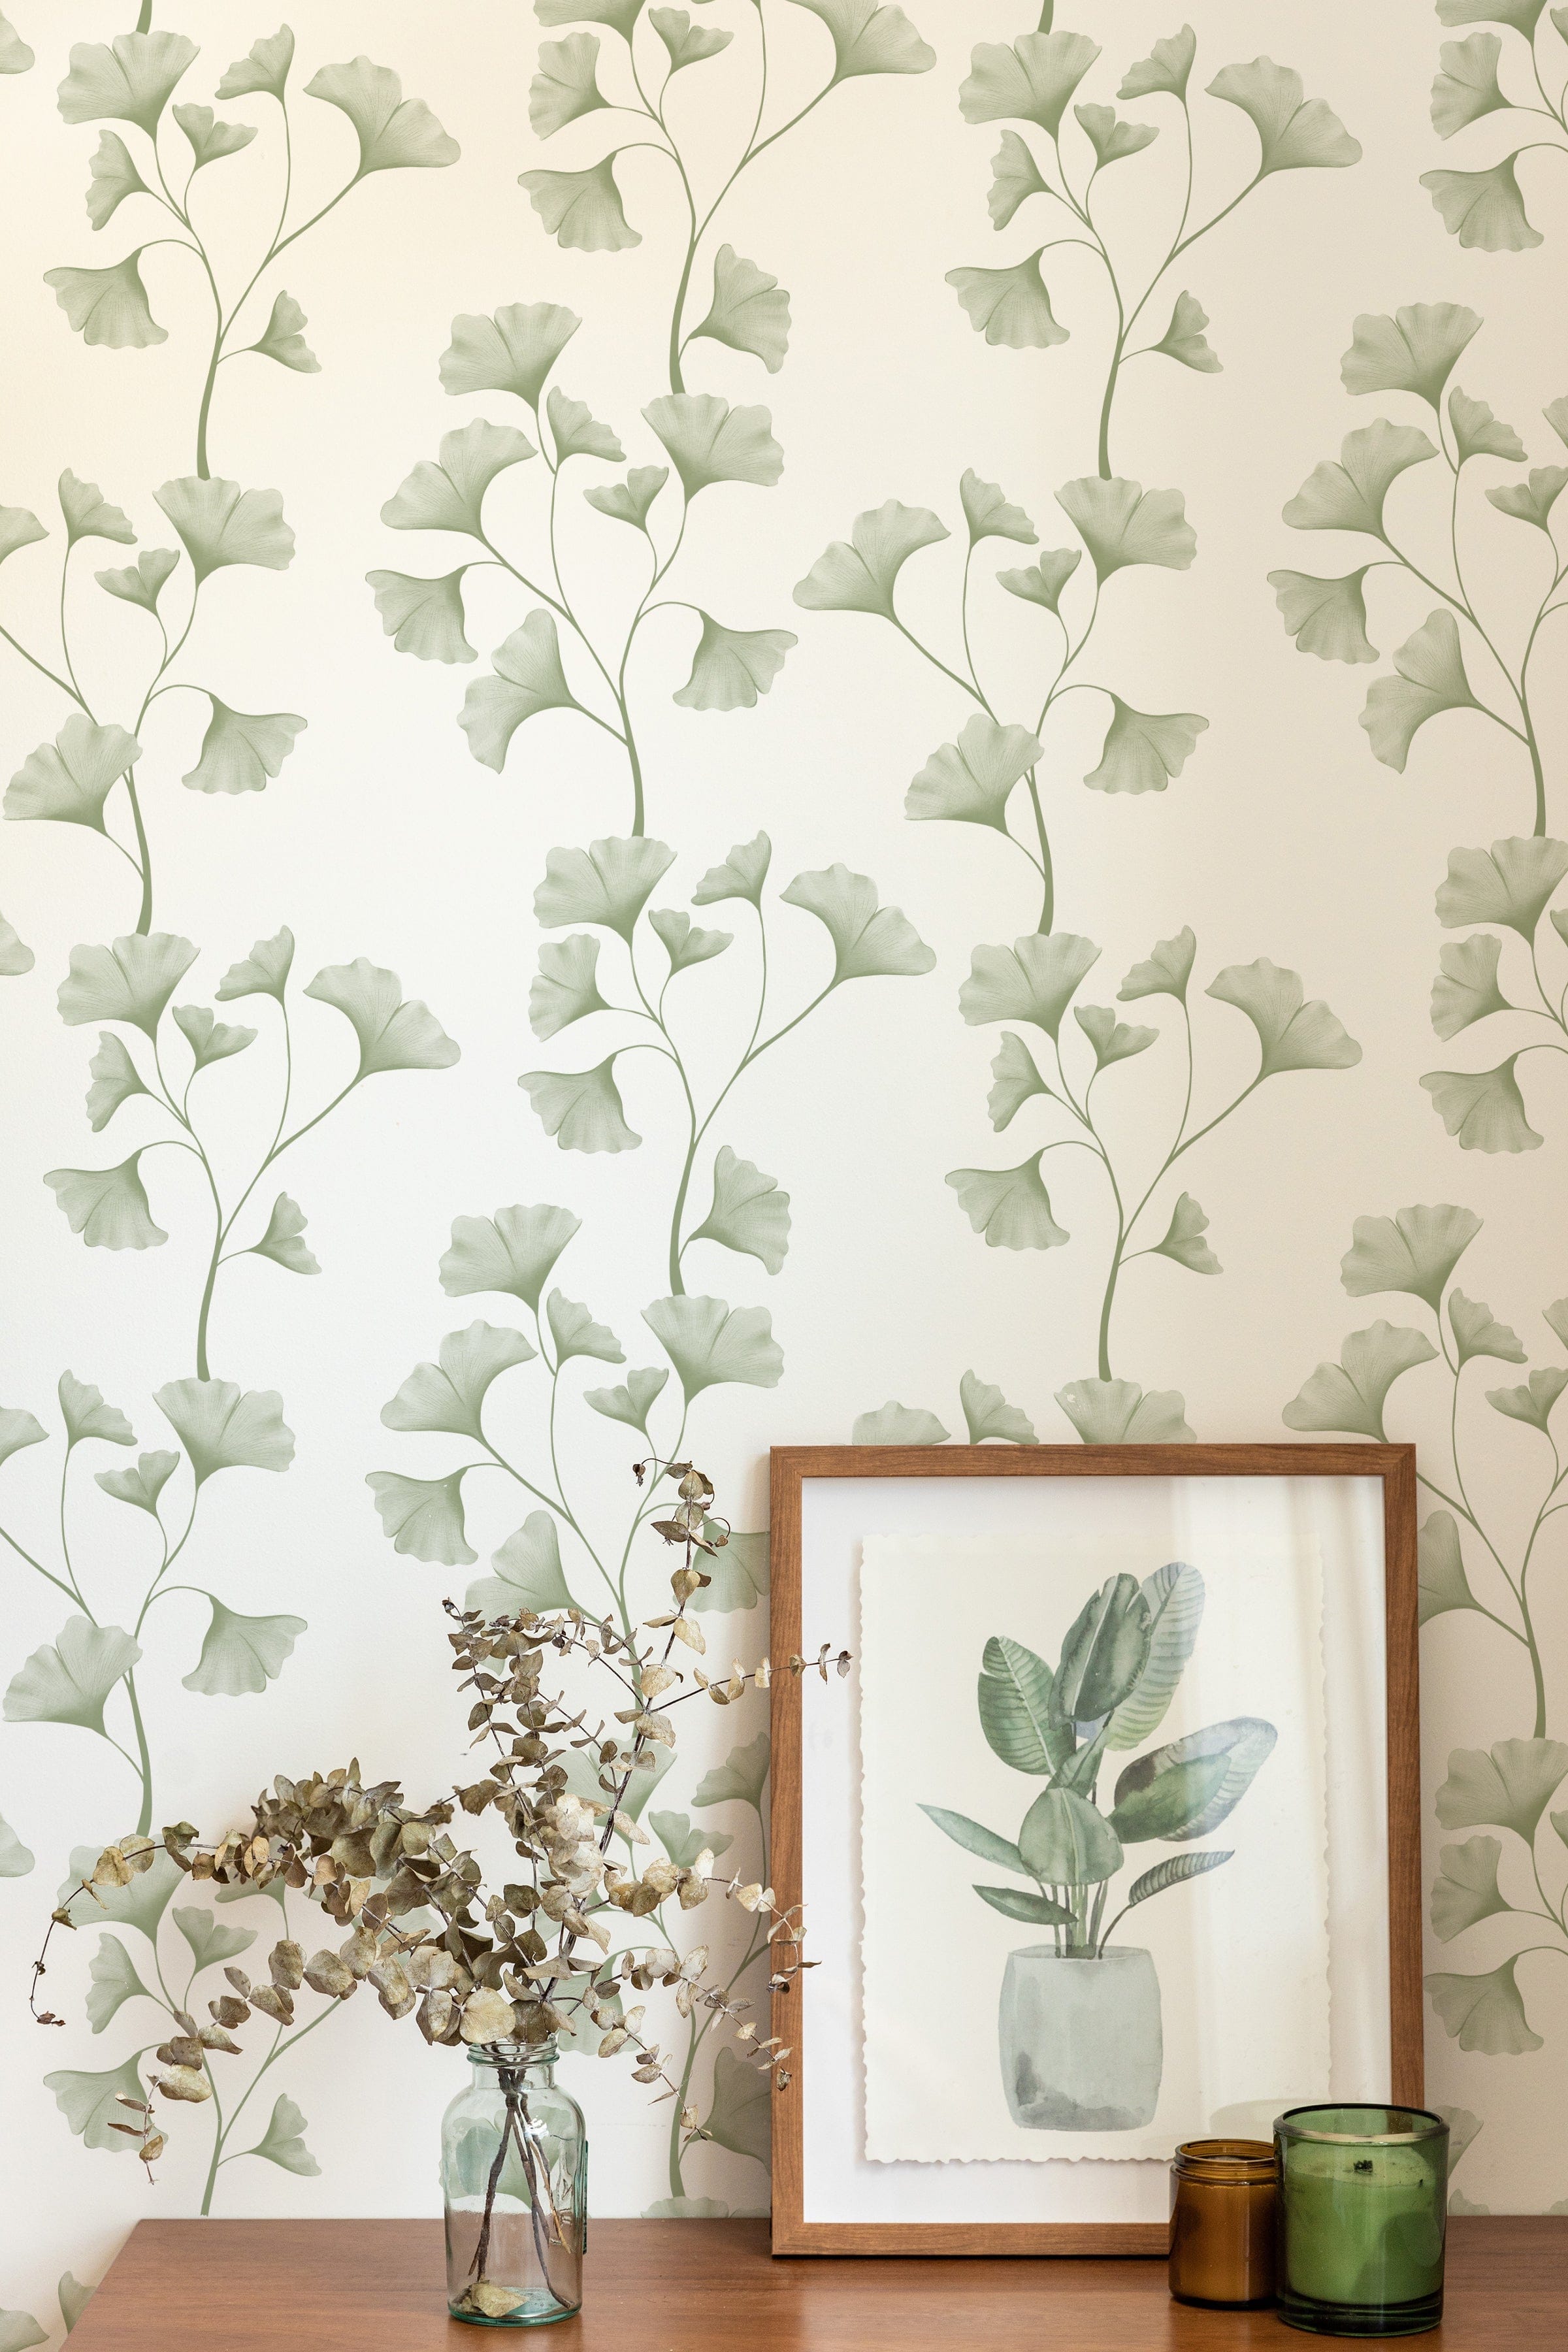 A home decor scene featuring the Botanical Vines Wallpaper, which displays elegant, stylized vine patterns with soft green leaves on a cream background. The setting includes a wooden frame with a botanical art print and decorative green glass vases enhancing the natural theme.